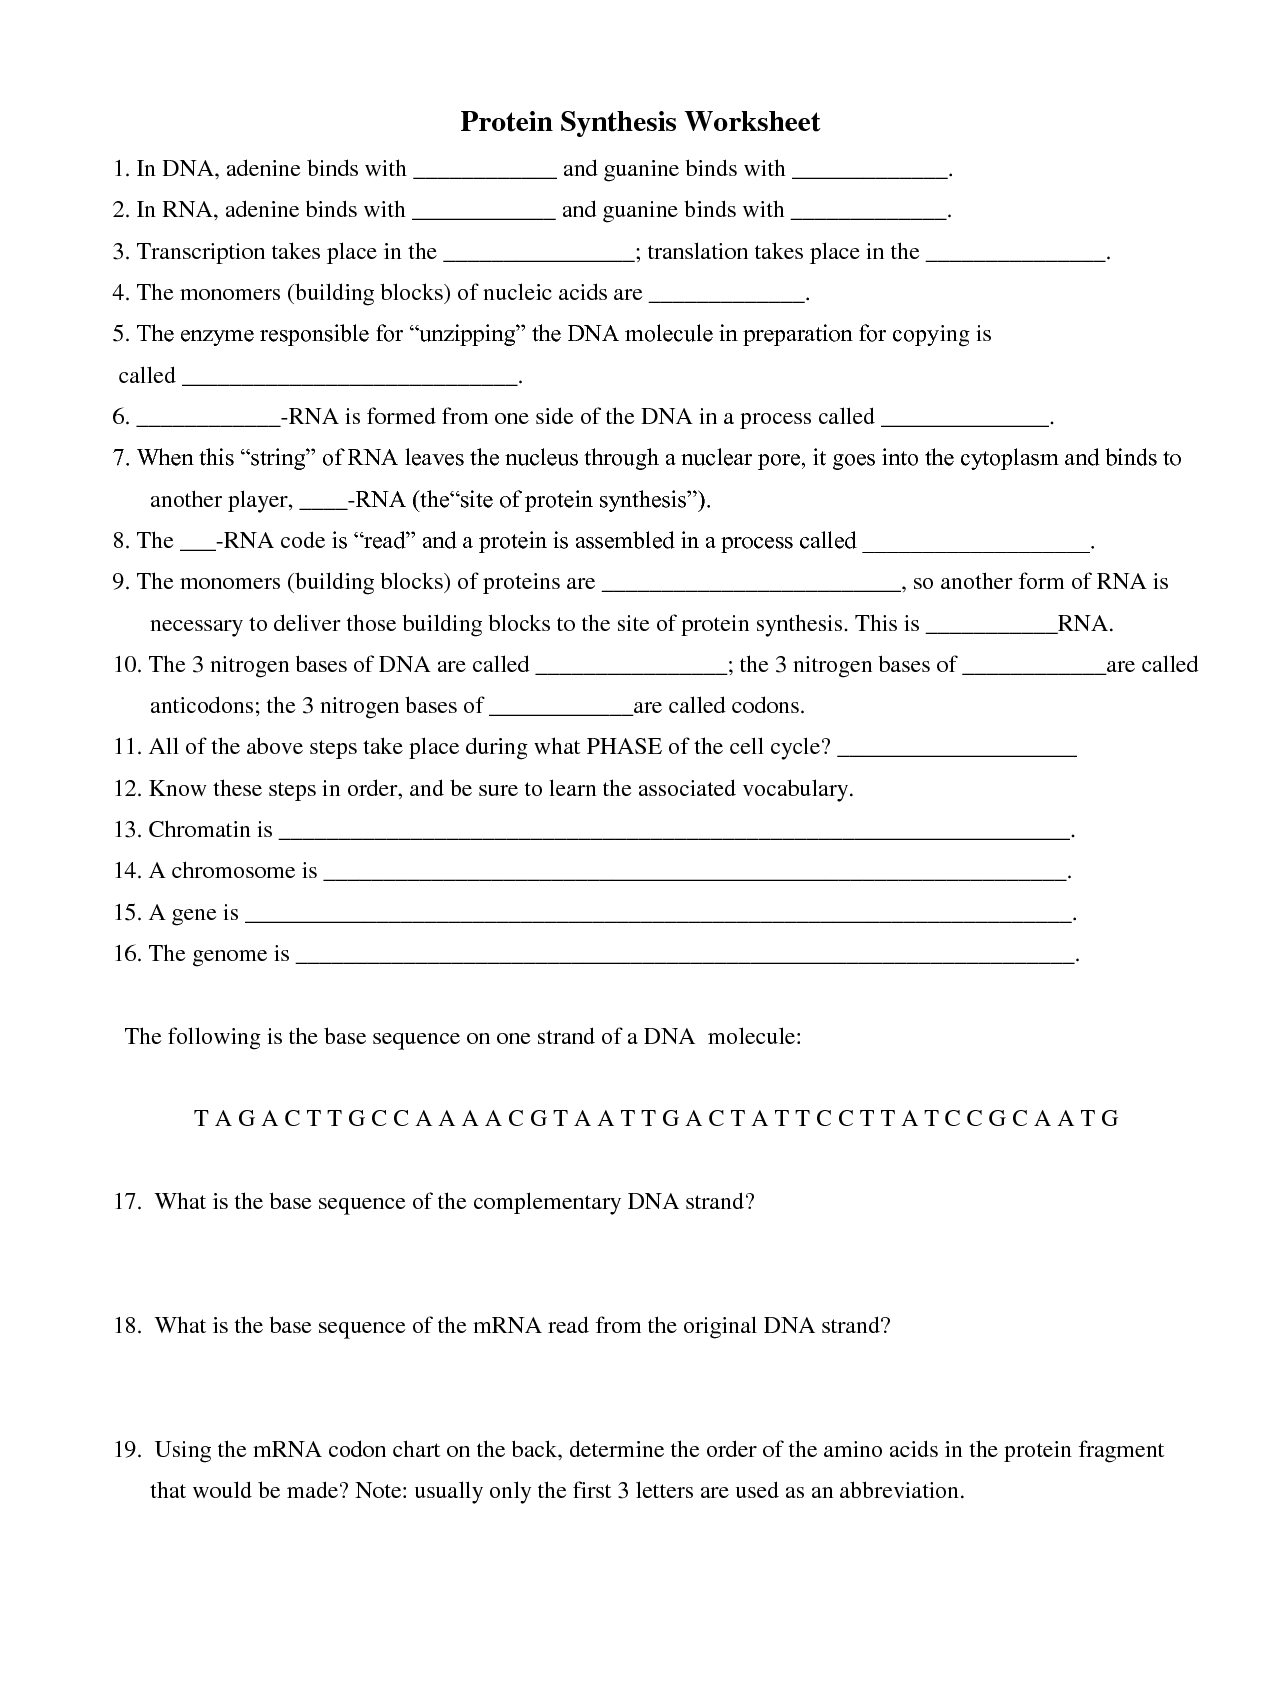 Protein Synthesis Worksheet Answer Key  Newatvs For Dna Amp Protein Synthesis Worksheet Answers